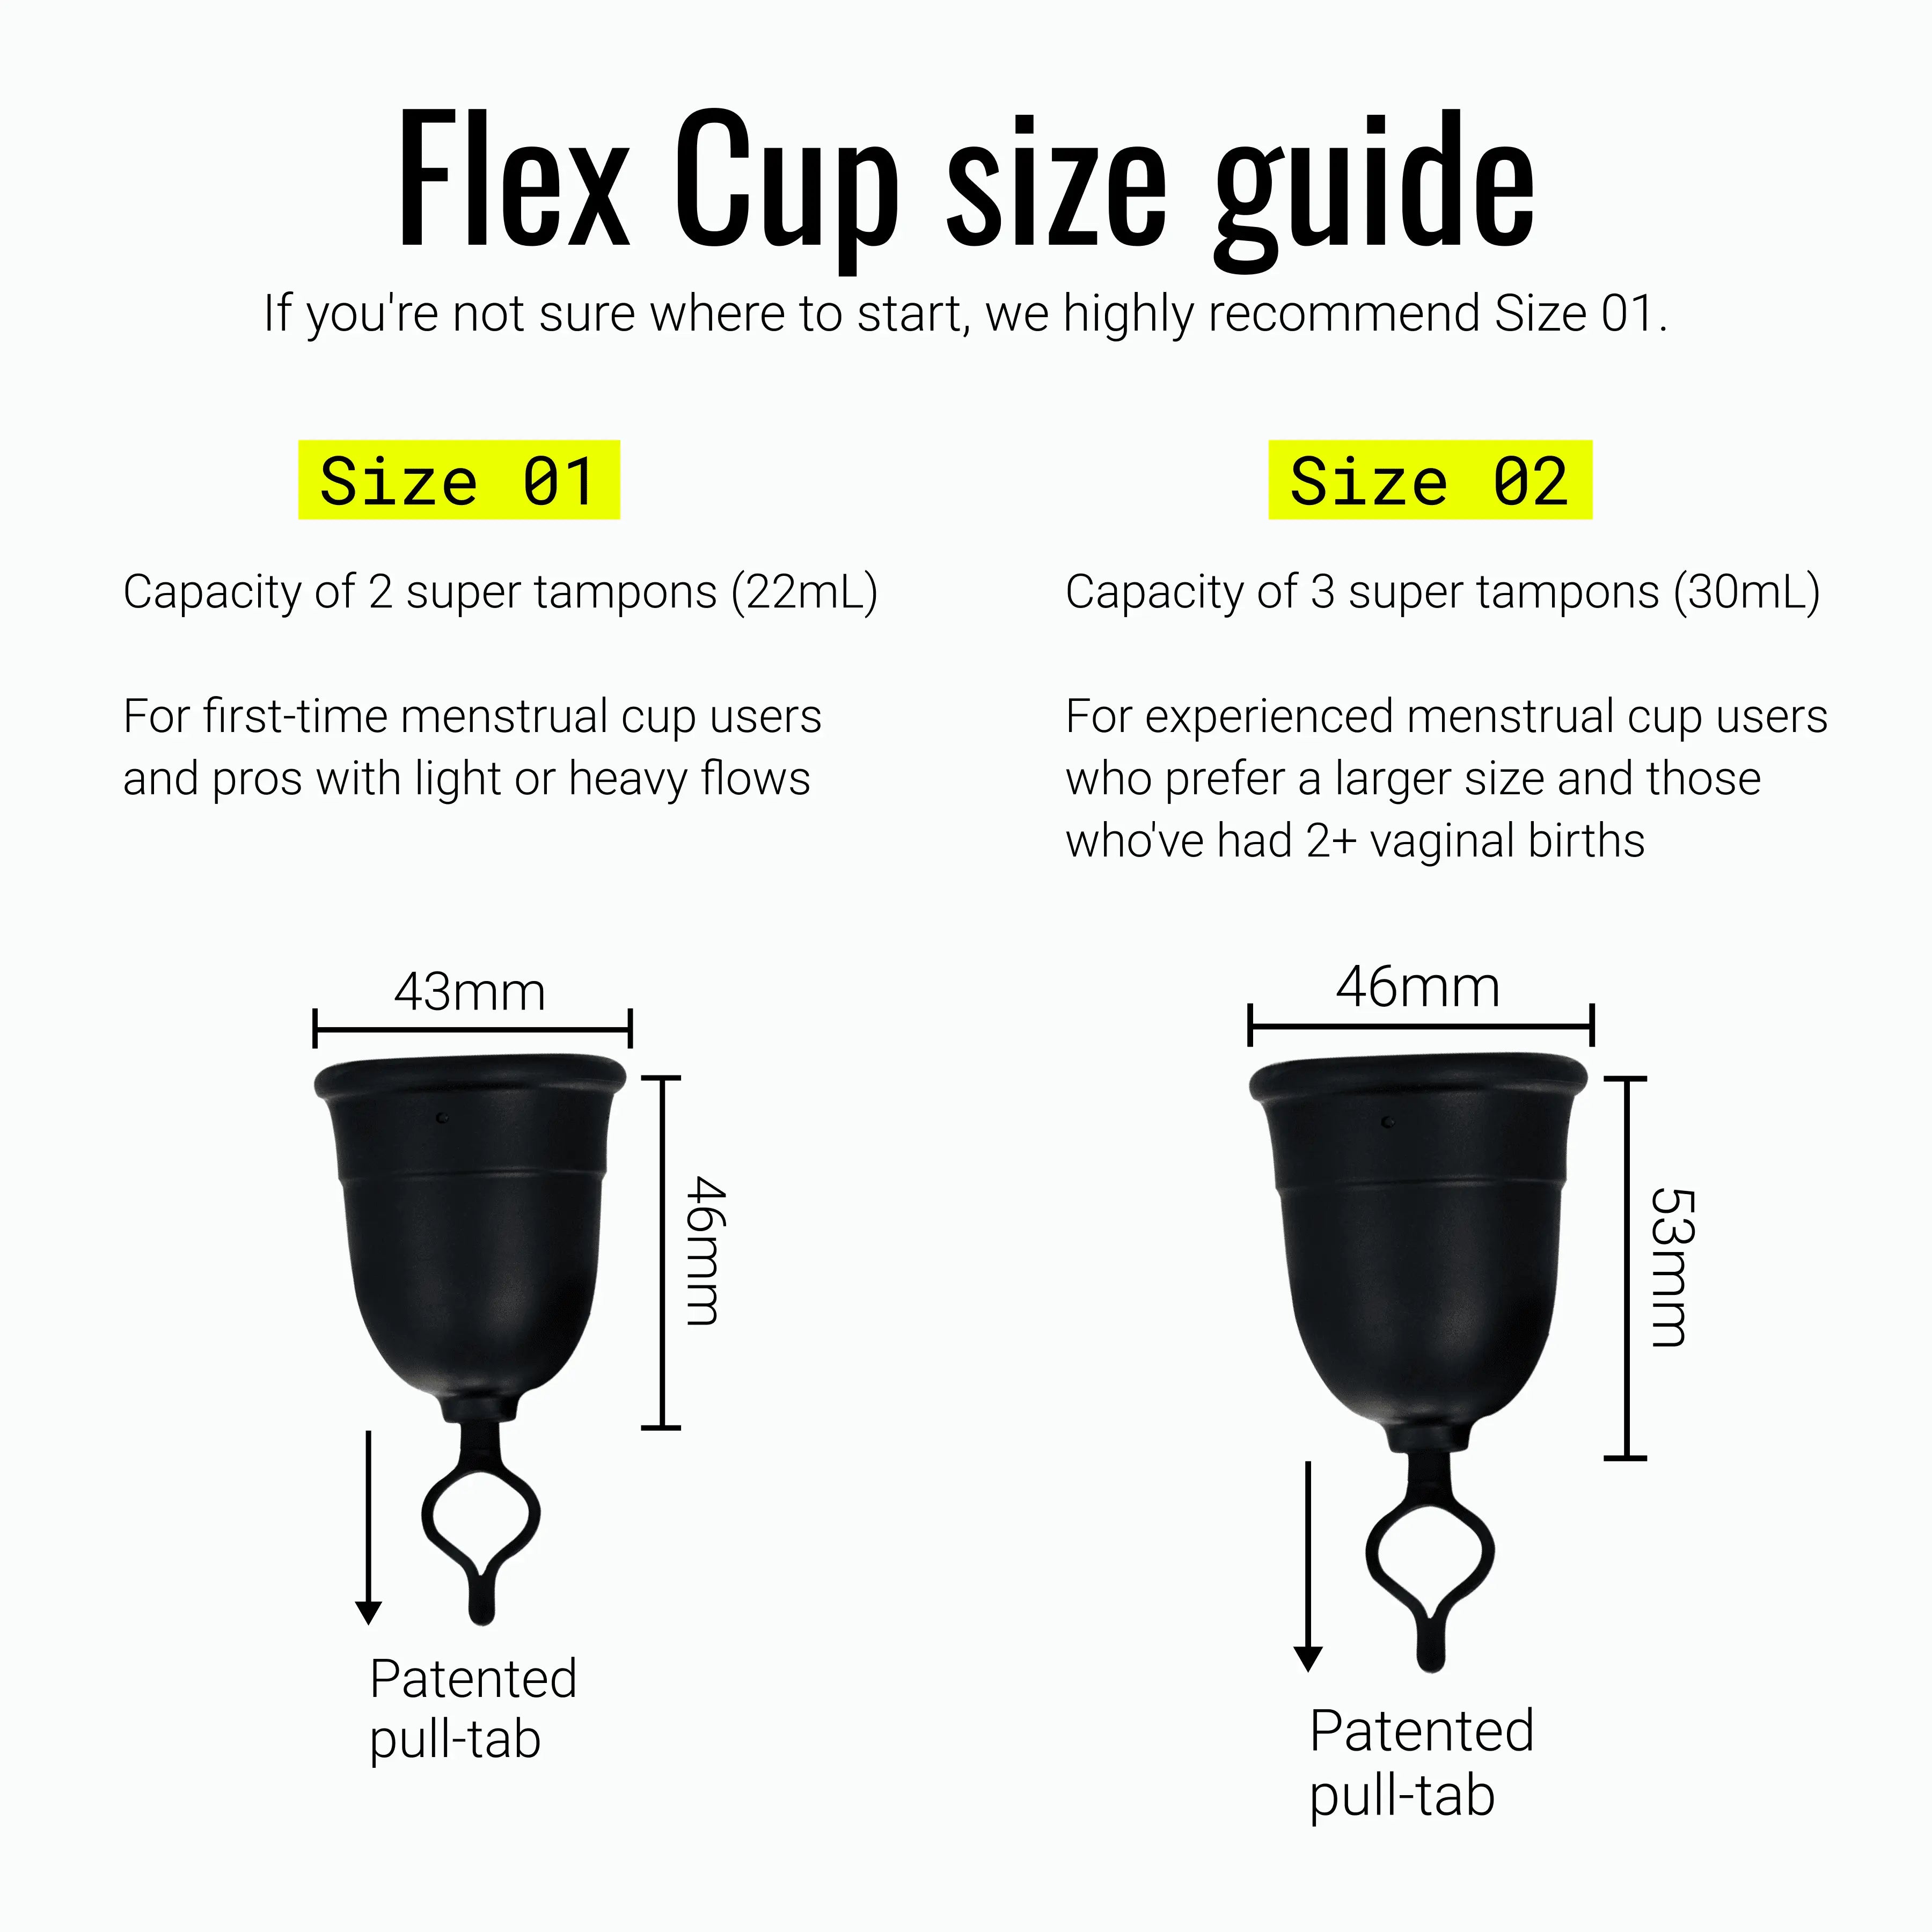 How many cc go in each cup size?